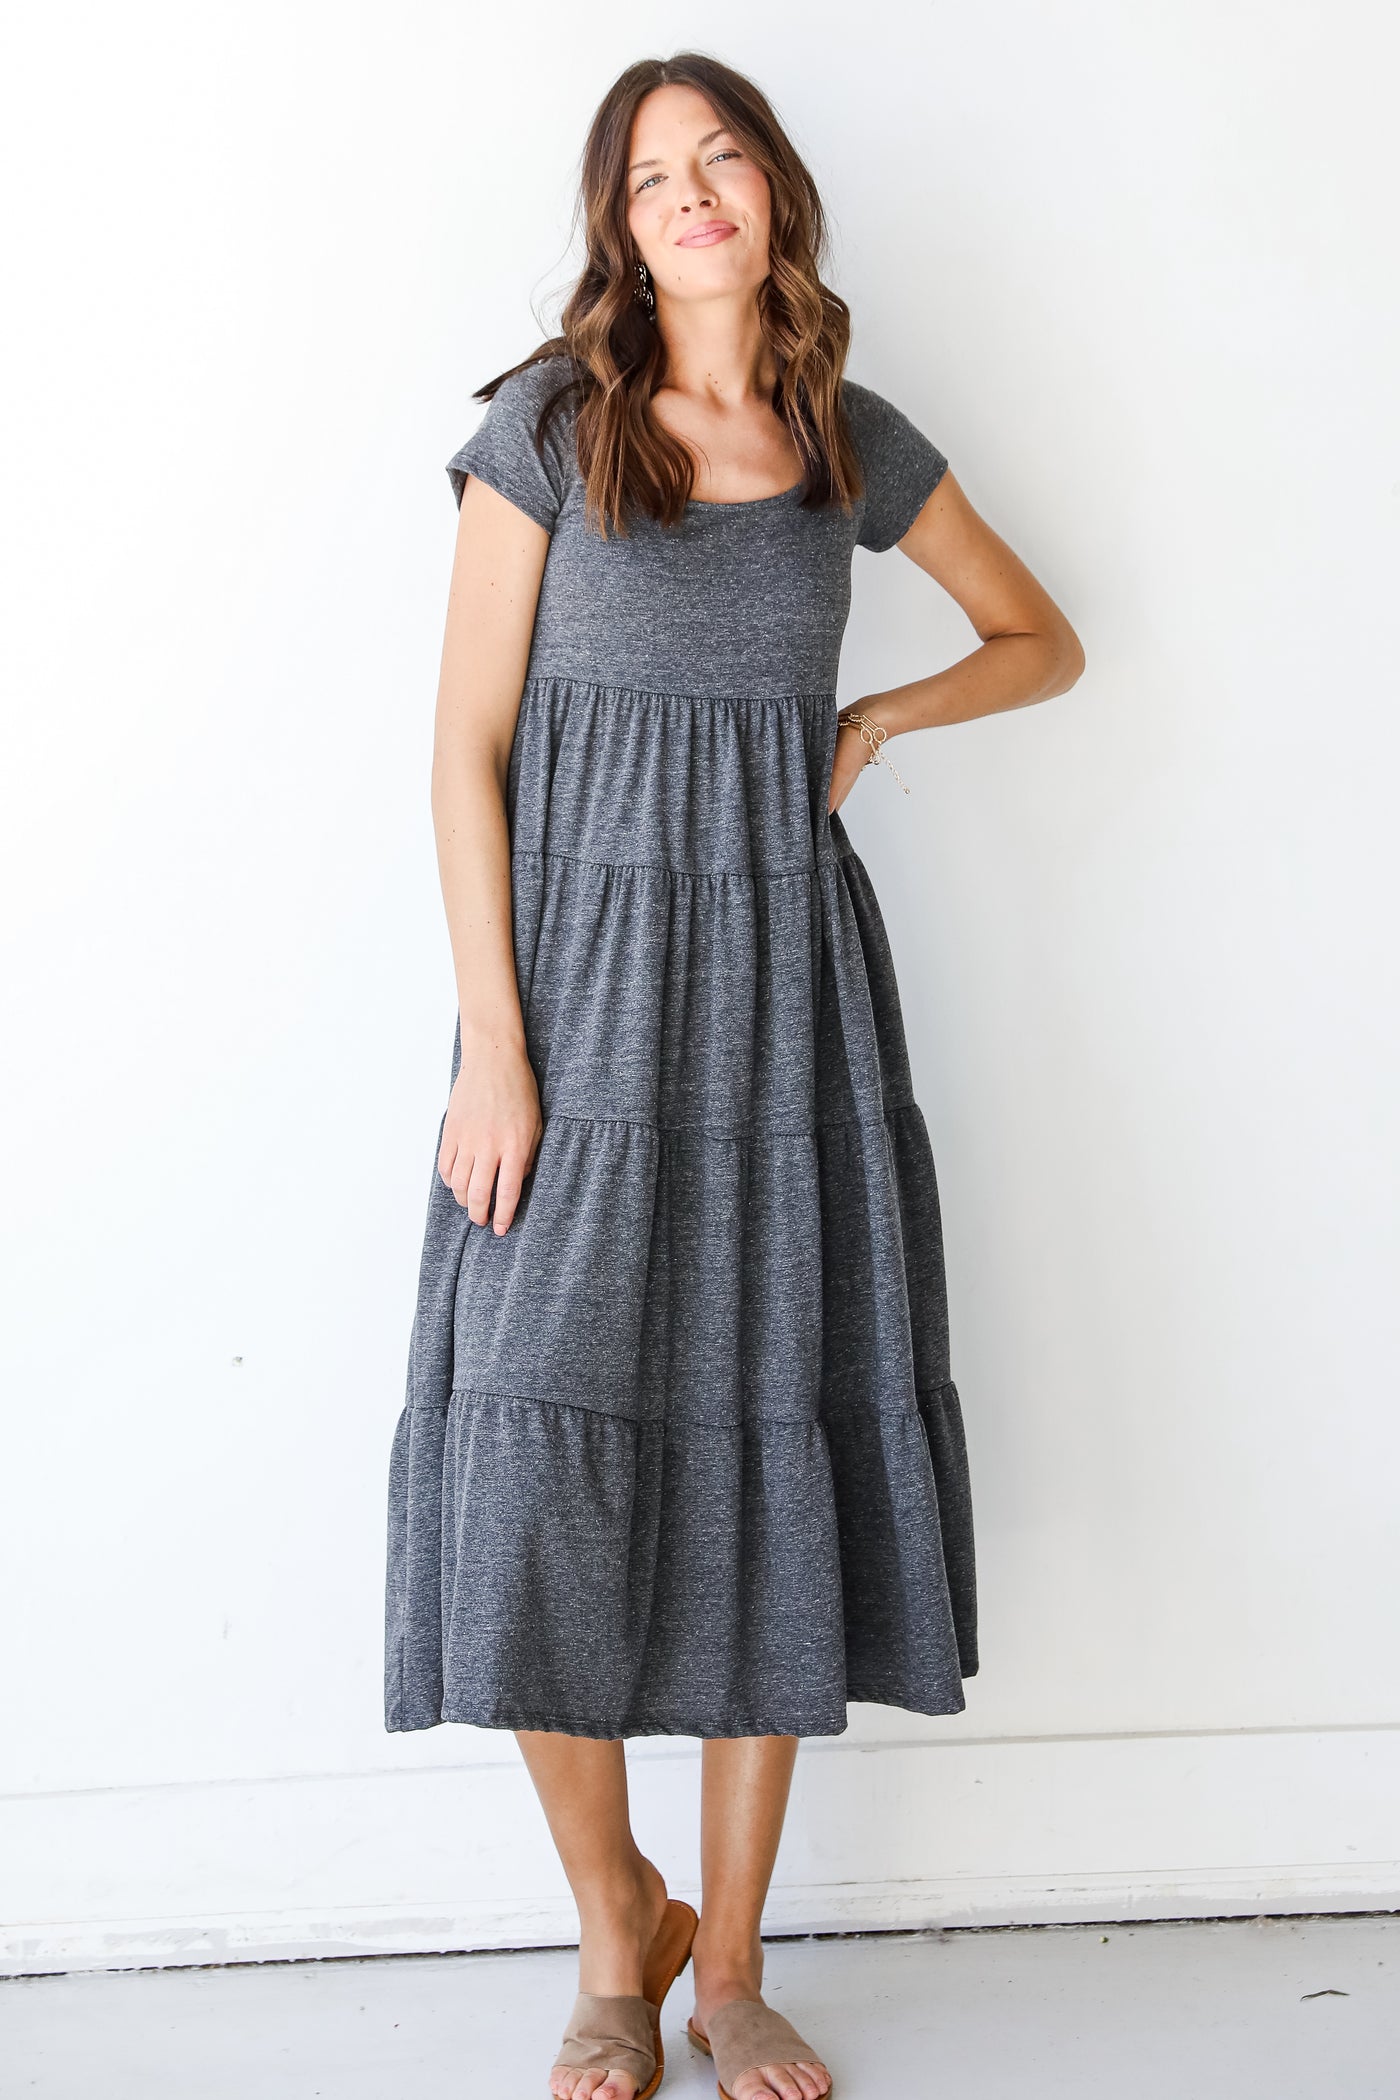 Tiered Maxi Dress in charcoal front view